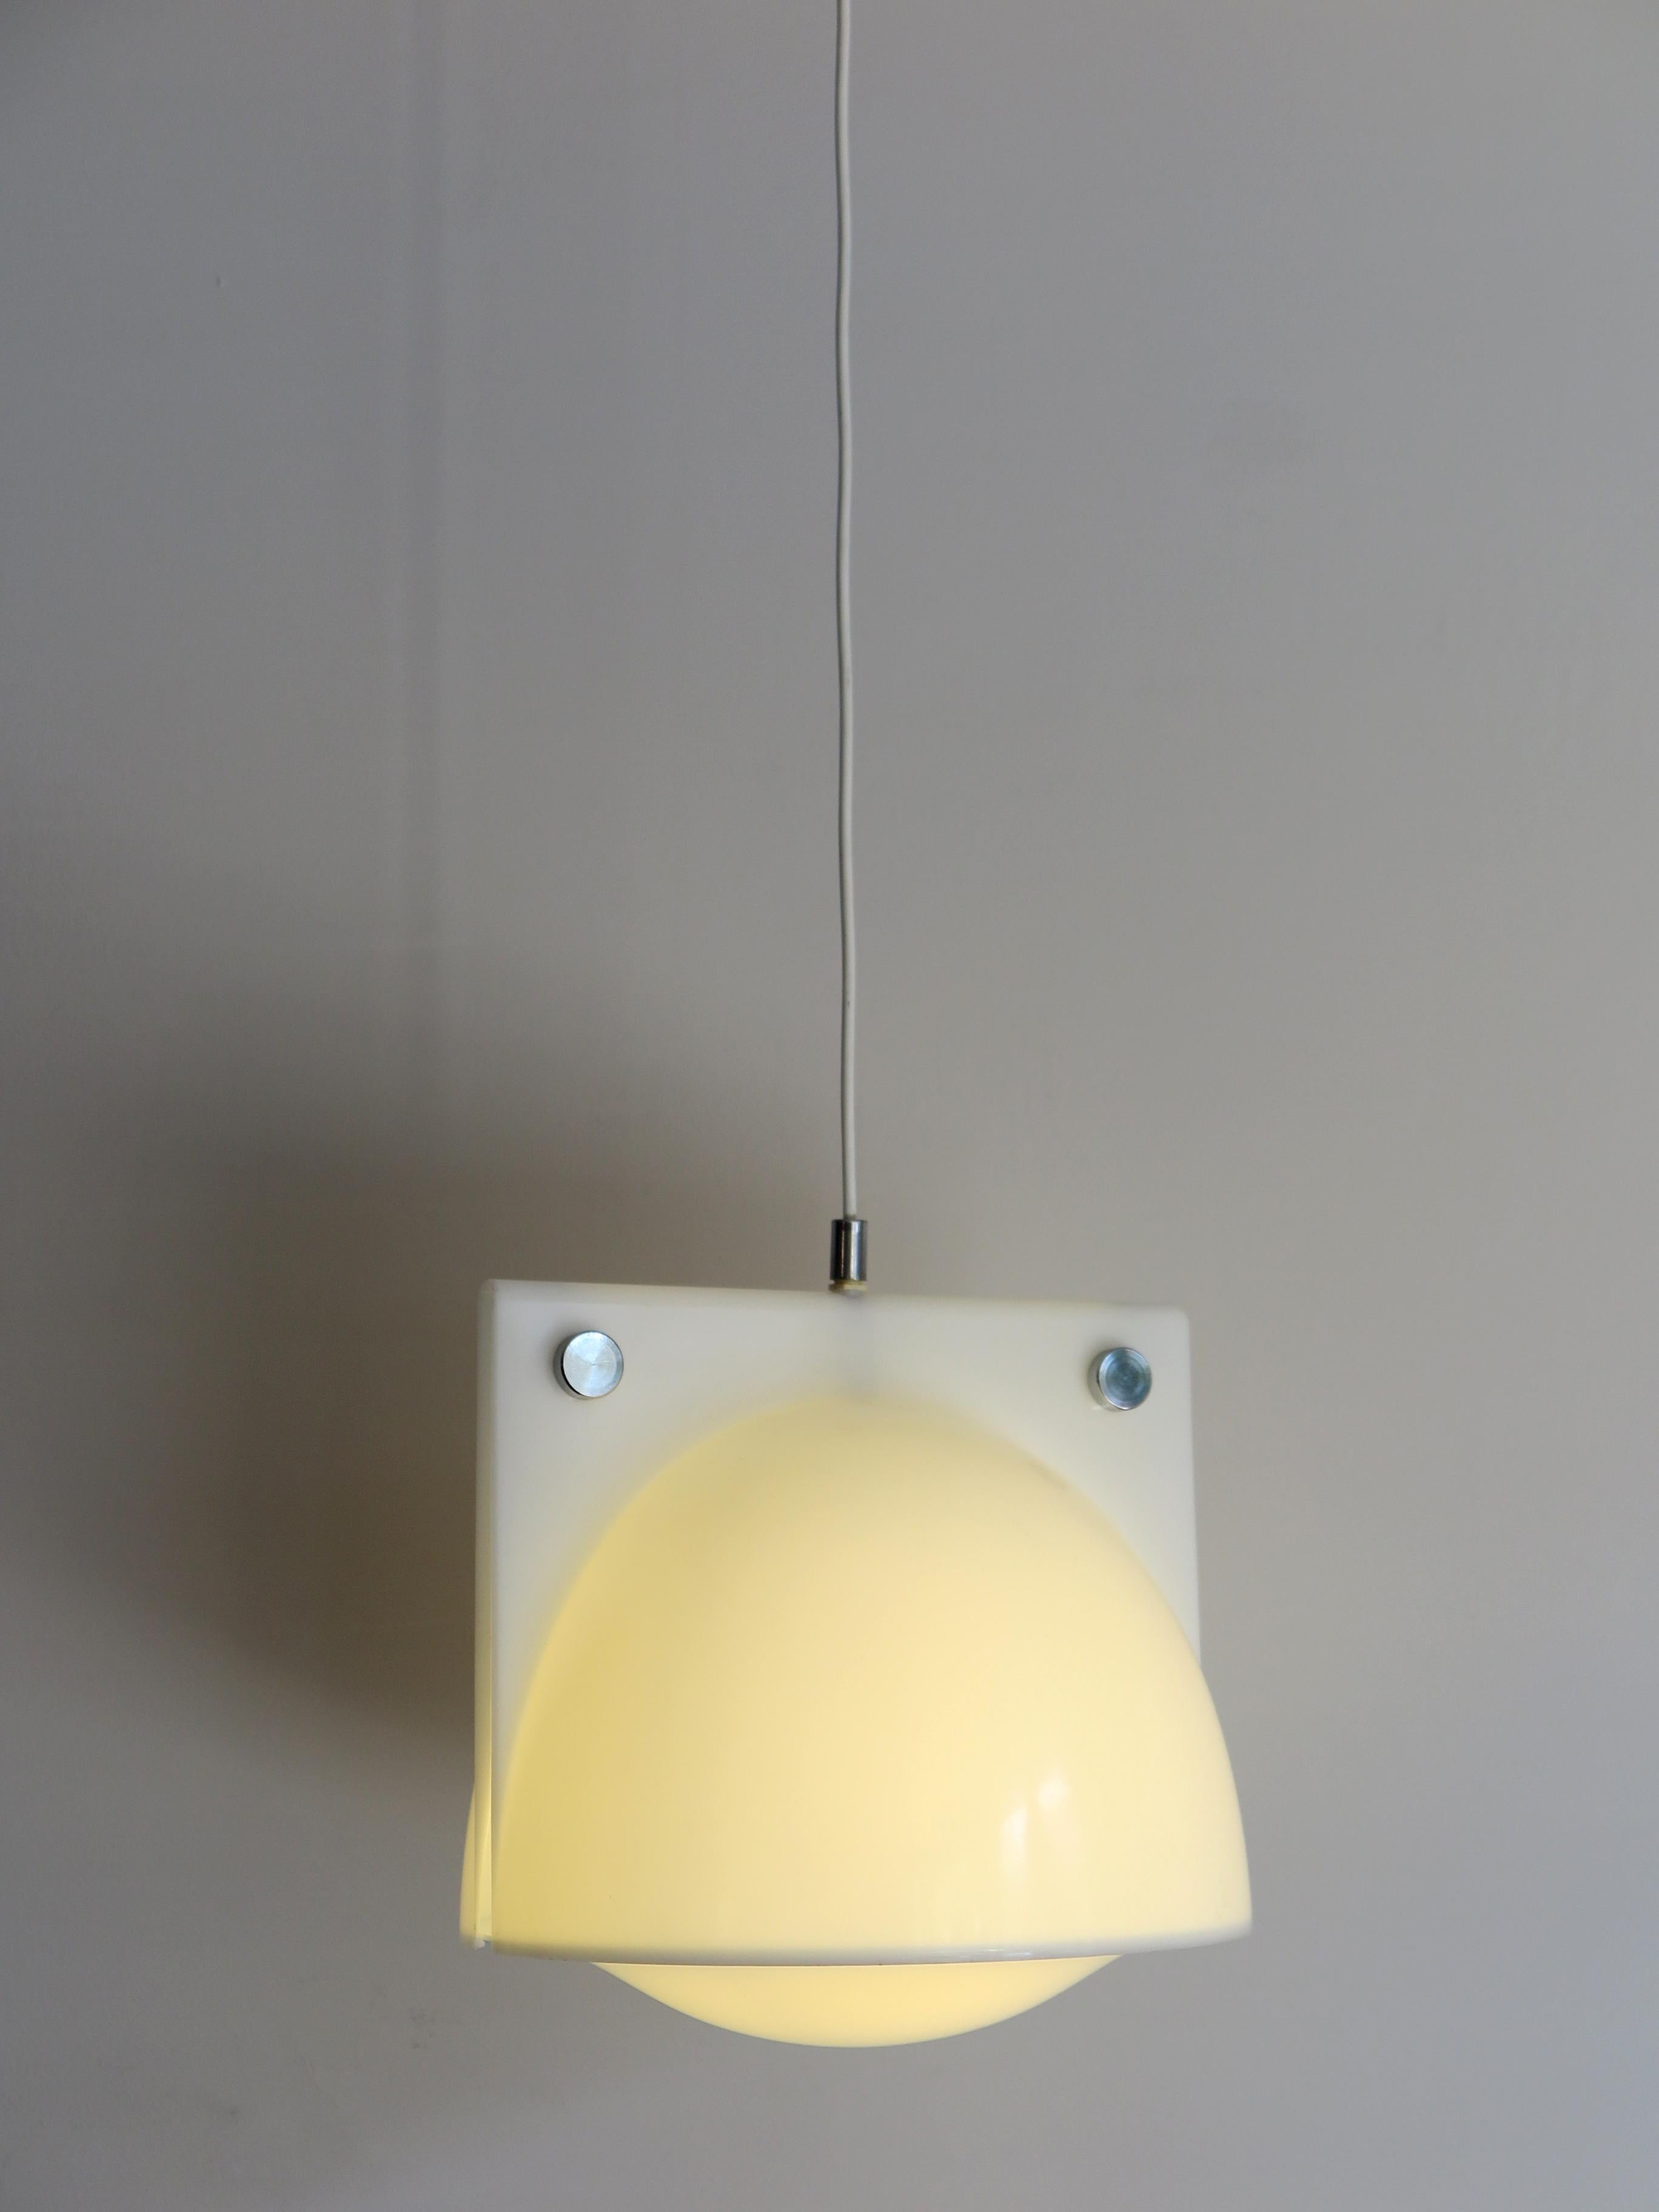 Italian methacrylate pendant lamp model Orione designed by Ermanno Lampa & Sergio Brazzoli for Guzzini Harvey, 1970s
Please note that the lamp is original of the period and this shows normal signs of age and use.